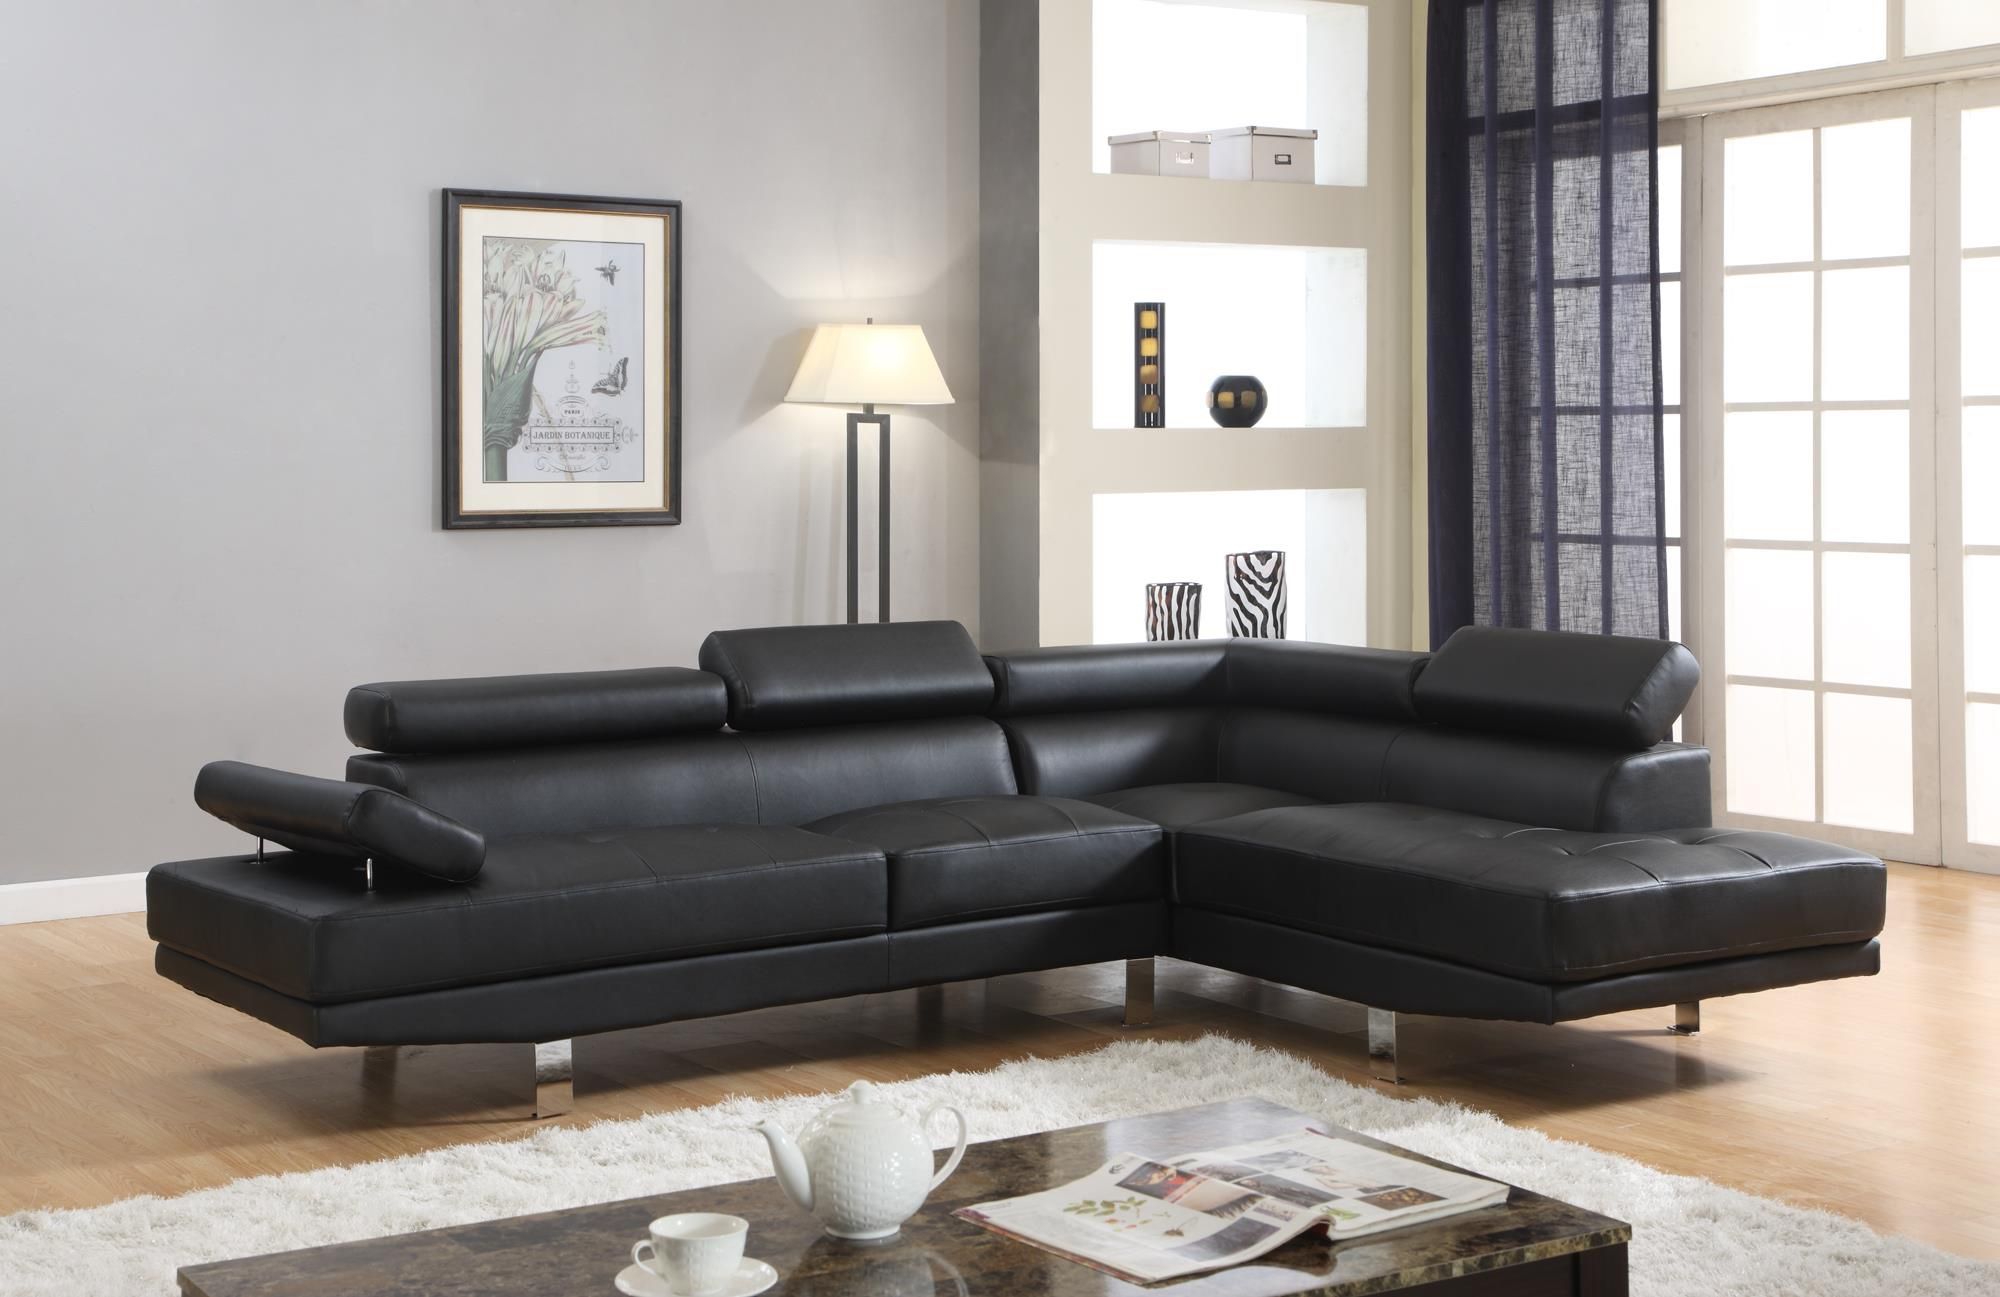 🔥 SPECIAL SALES 💥 SECTIONAL & SOFA 🛋️- Come In 2 Box 📦- Free Delivery 🚚 Today To Reasonable Distance